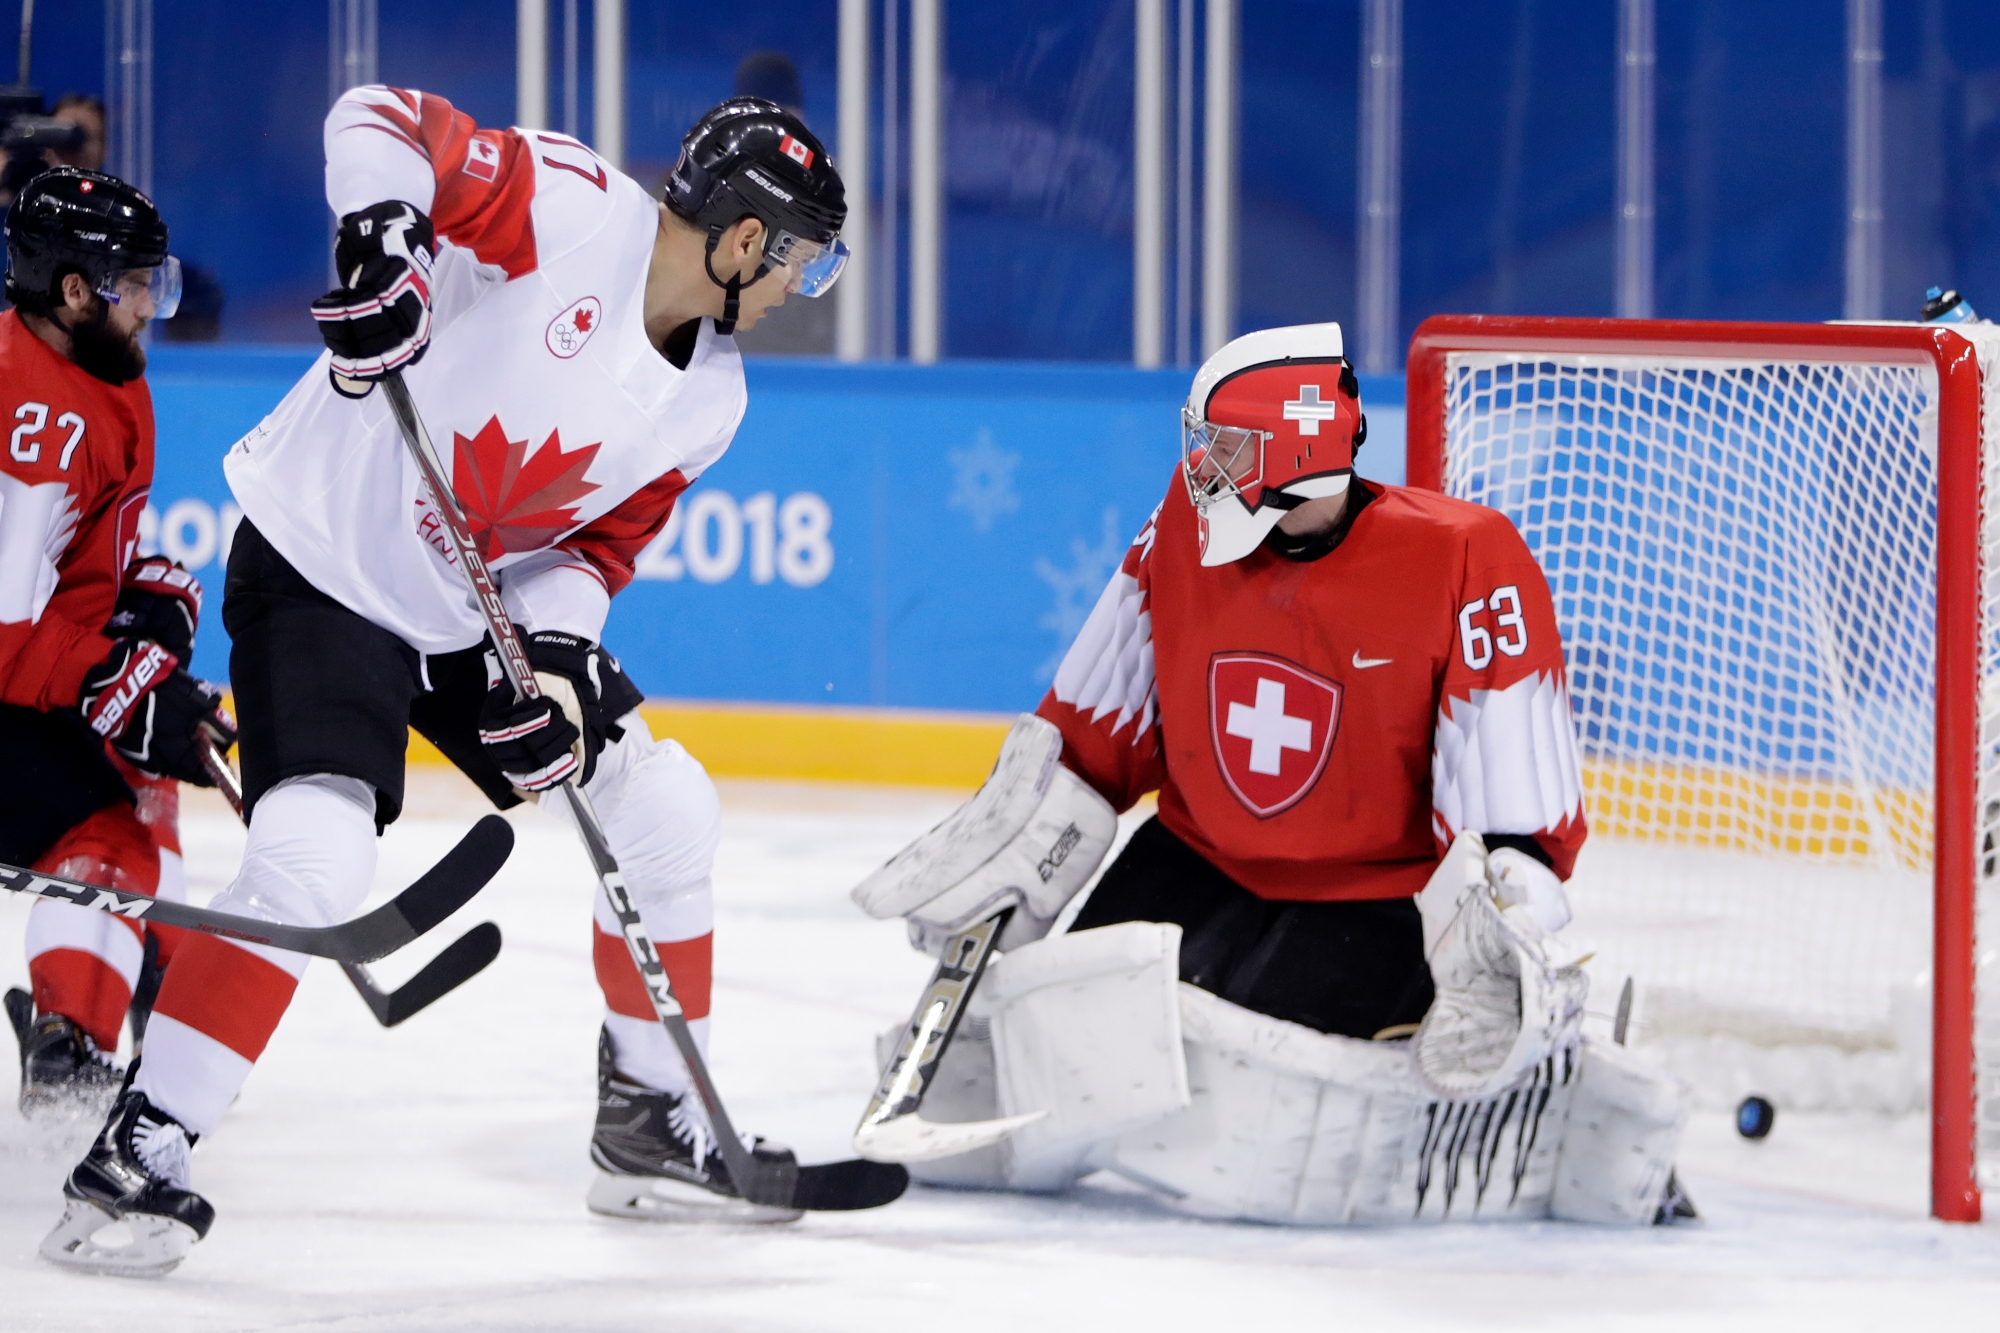 Rene Bourque, left, of Canada, scores a goal on Switzerland goalkeeper Leonardo Genoni during the second period of a preliminary round men's hockey game at the 2018 Winter Olympics in Gangneung, South Korea, Thursday, Feb. 15, 2018. (AP Photo/Julio Cortez) Pyeongchang Olympics Ice Hockey Men